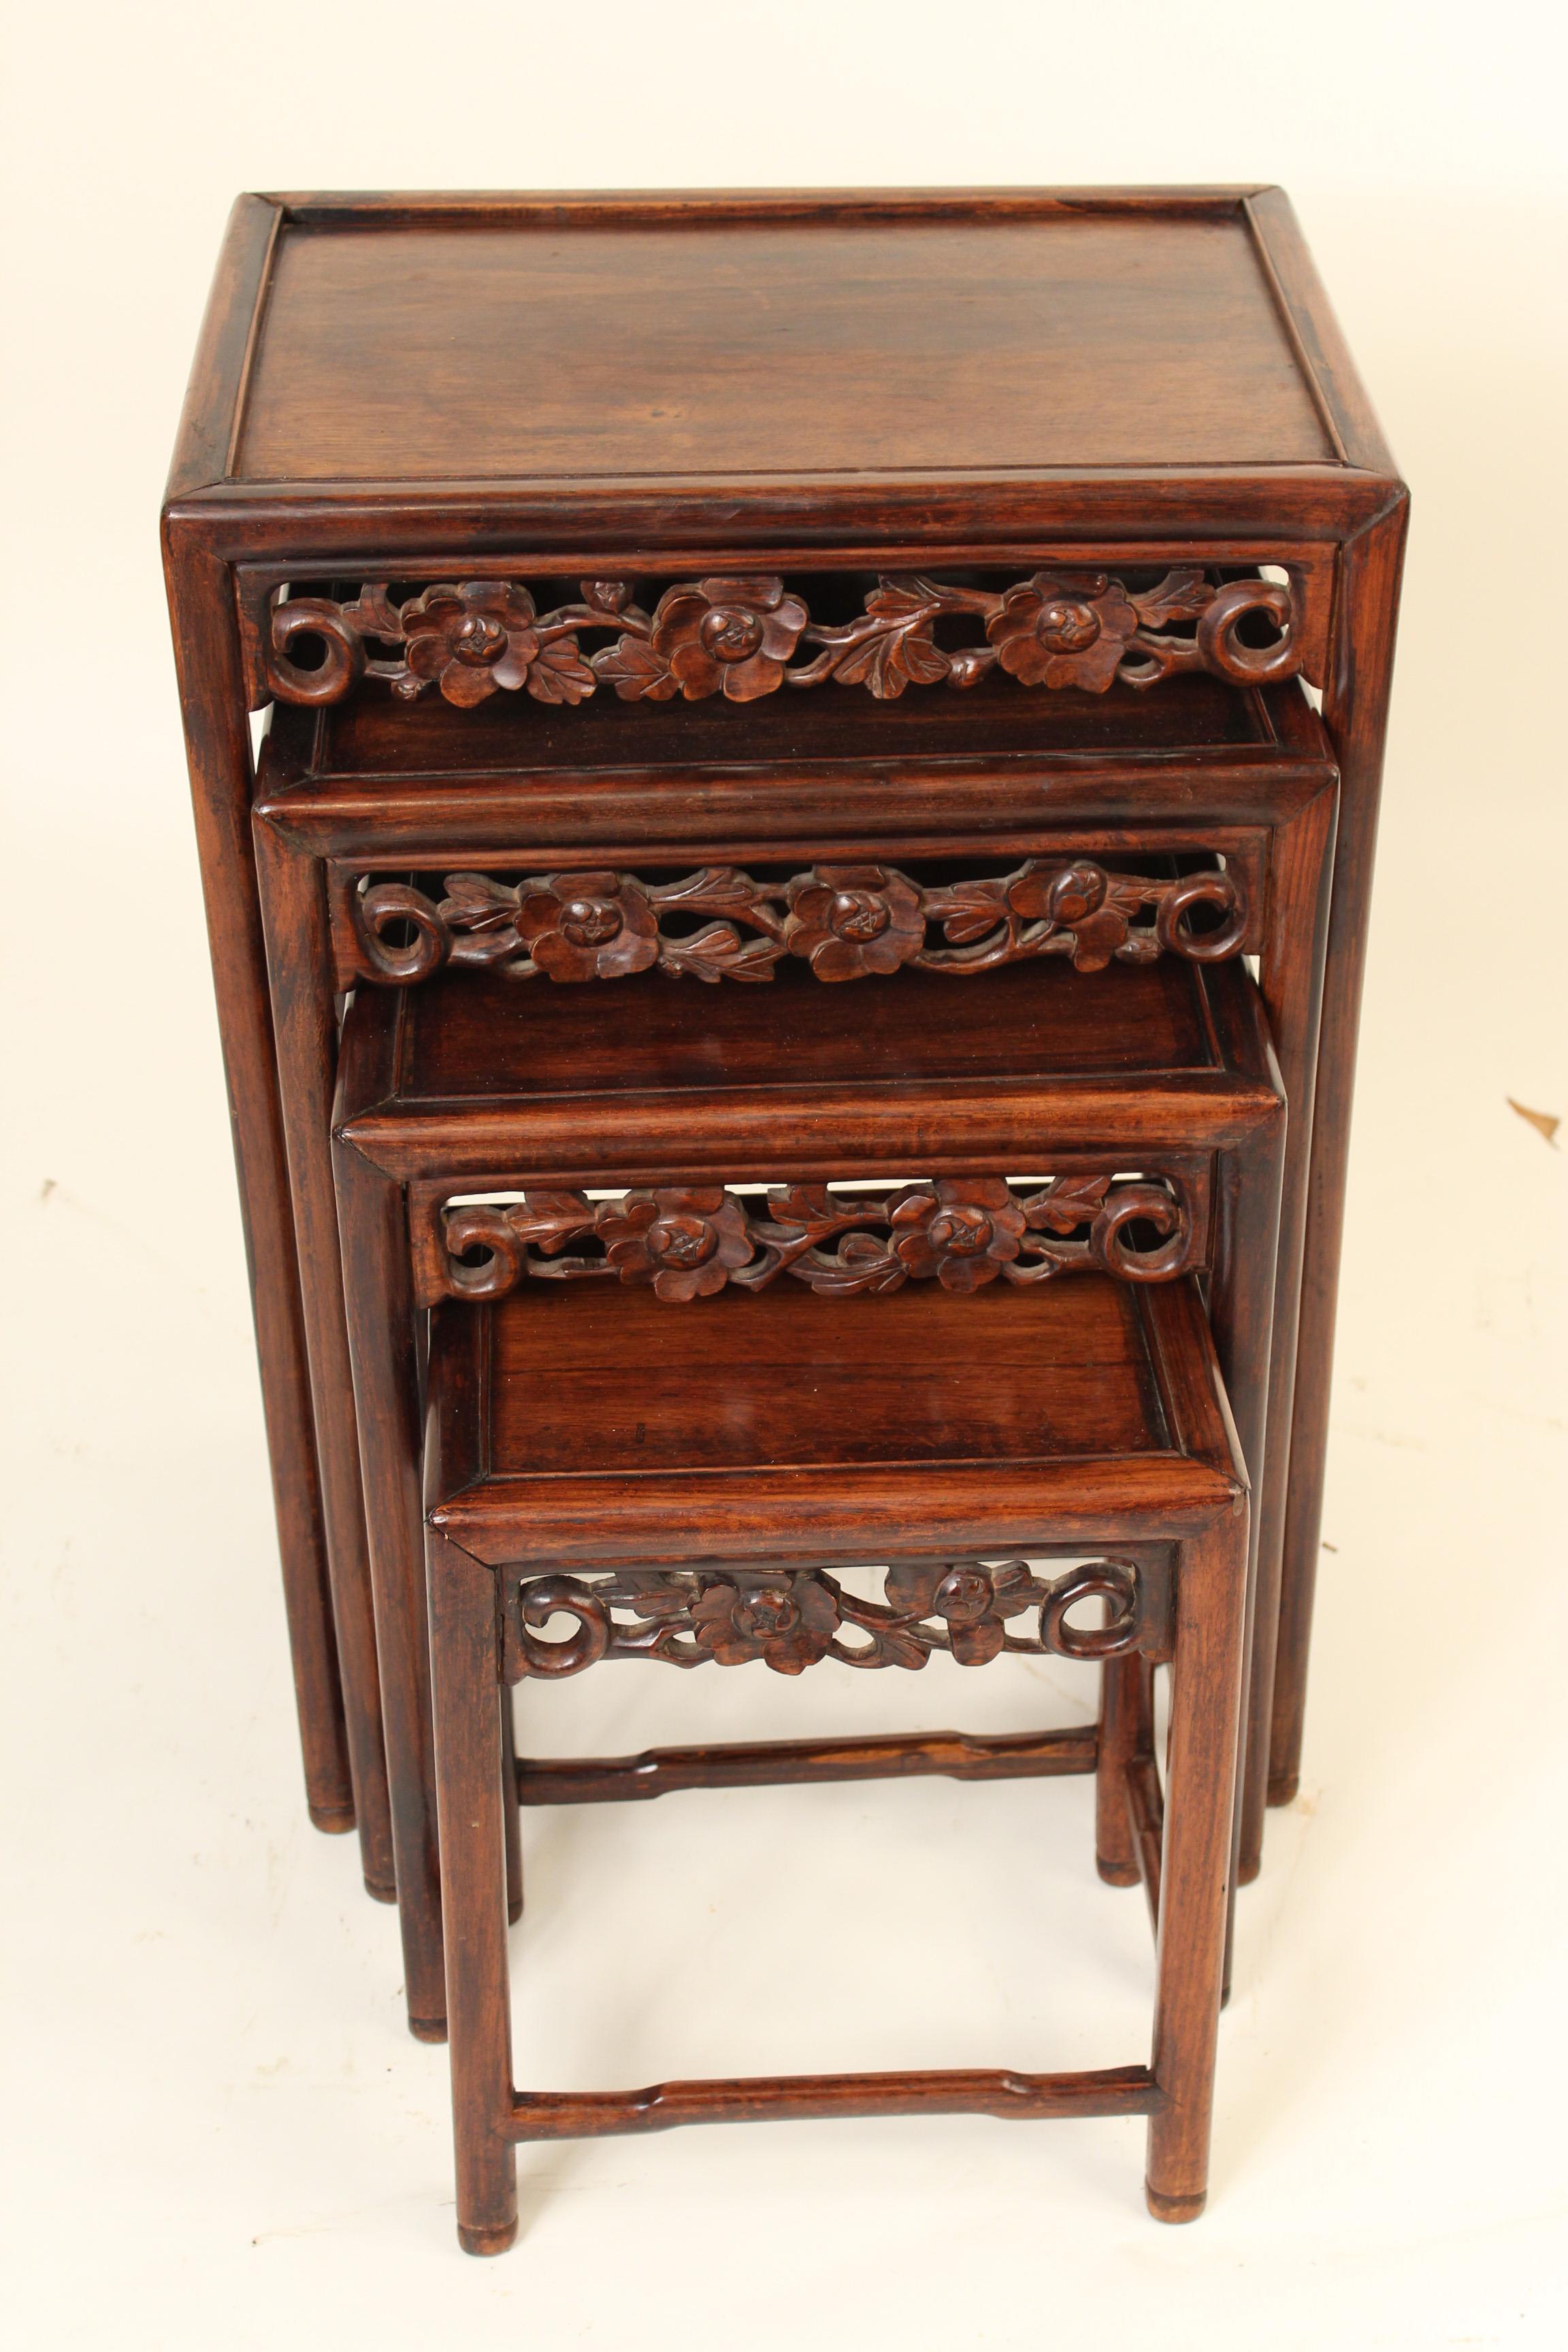 Nest of four Chinese carved teak wood tables, circa 1930. The bottom of the largest table stamped China. The dimensions of the largest table that the other tables will fit under is, height 28.25